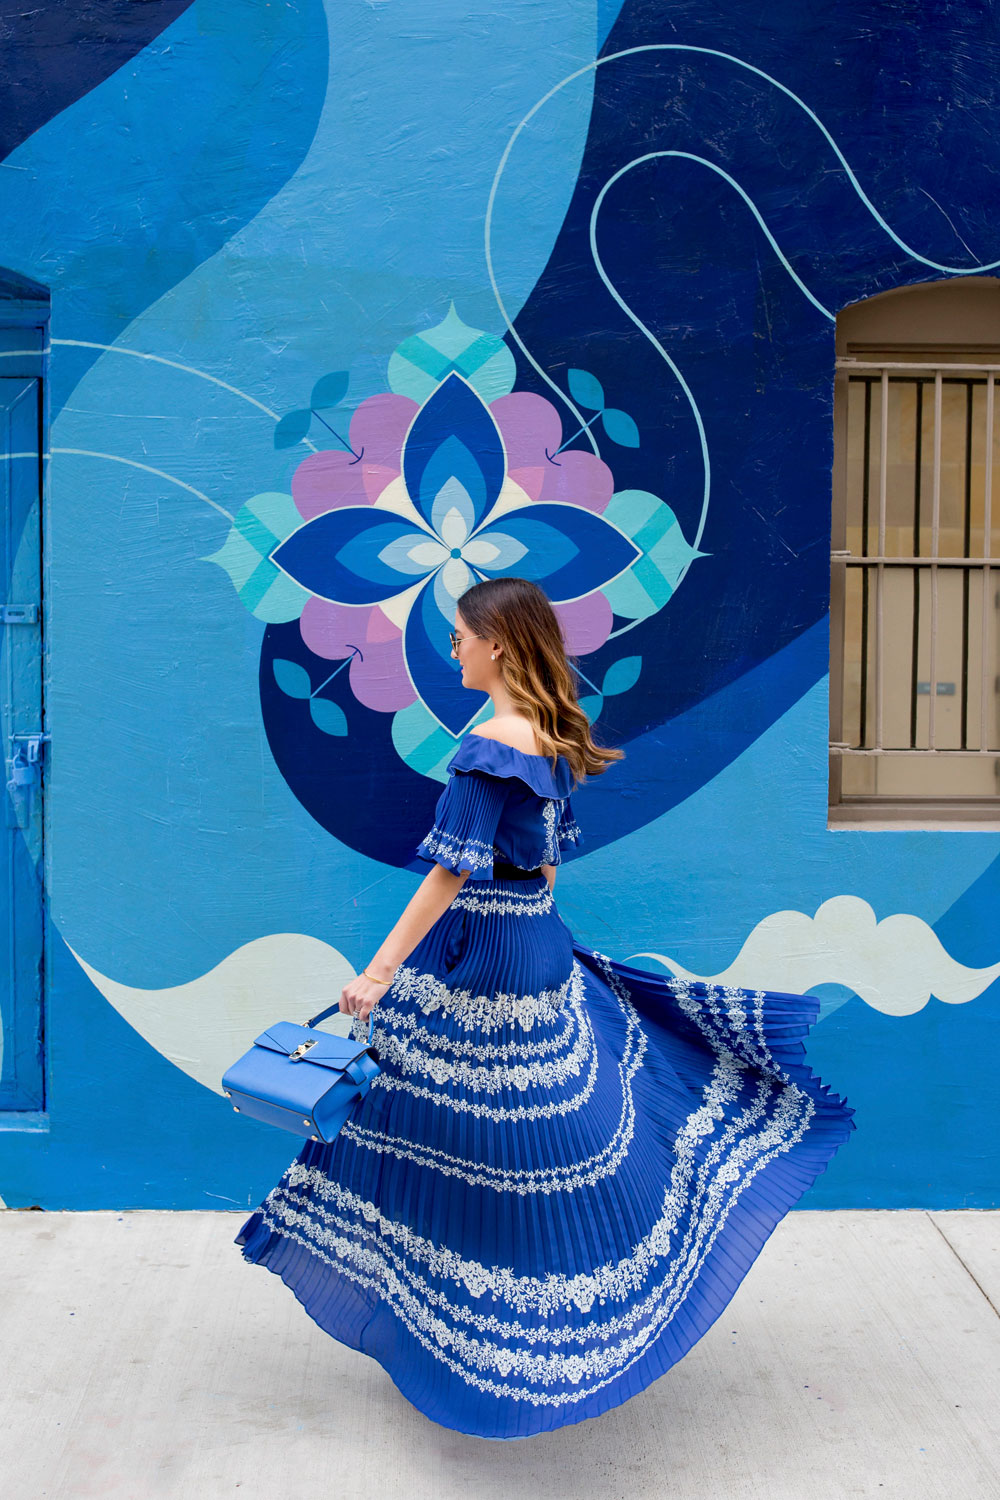 Jennifer Lake Style Charade twirling in a blue pleated Self Portrait maxi dress, and blue Henri Bendel bag at a blue swirl mural wall